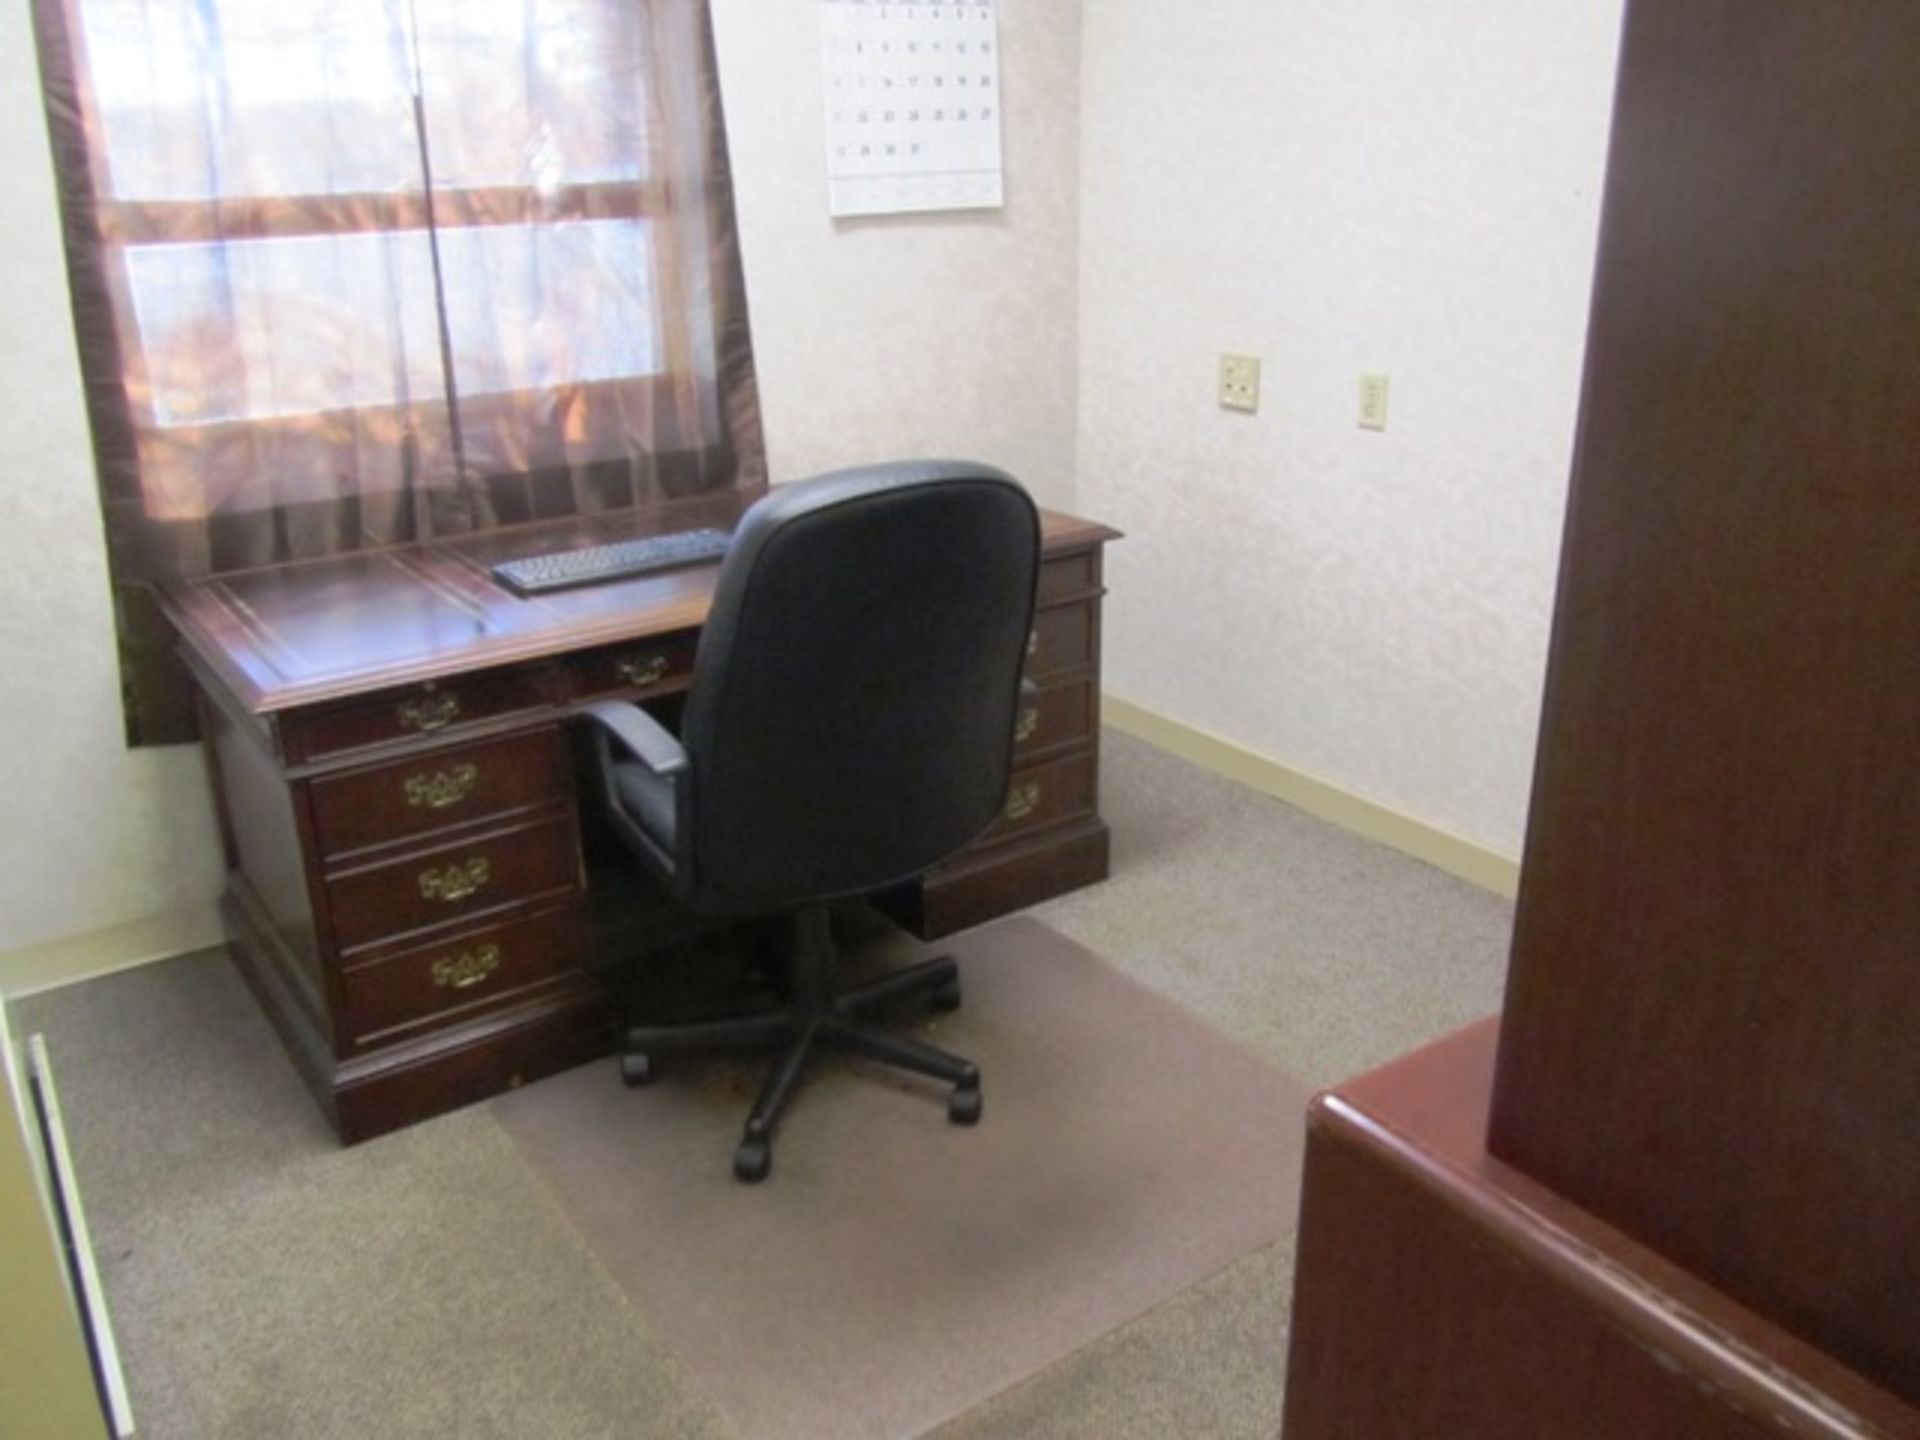 Contents of Office consisting of Desk, (2) Credenzas, 4 Drawer Lateral Cabinet